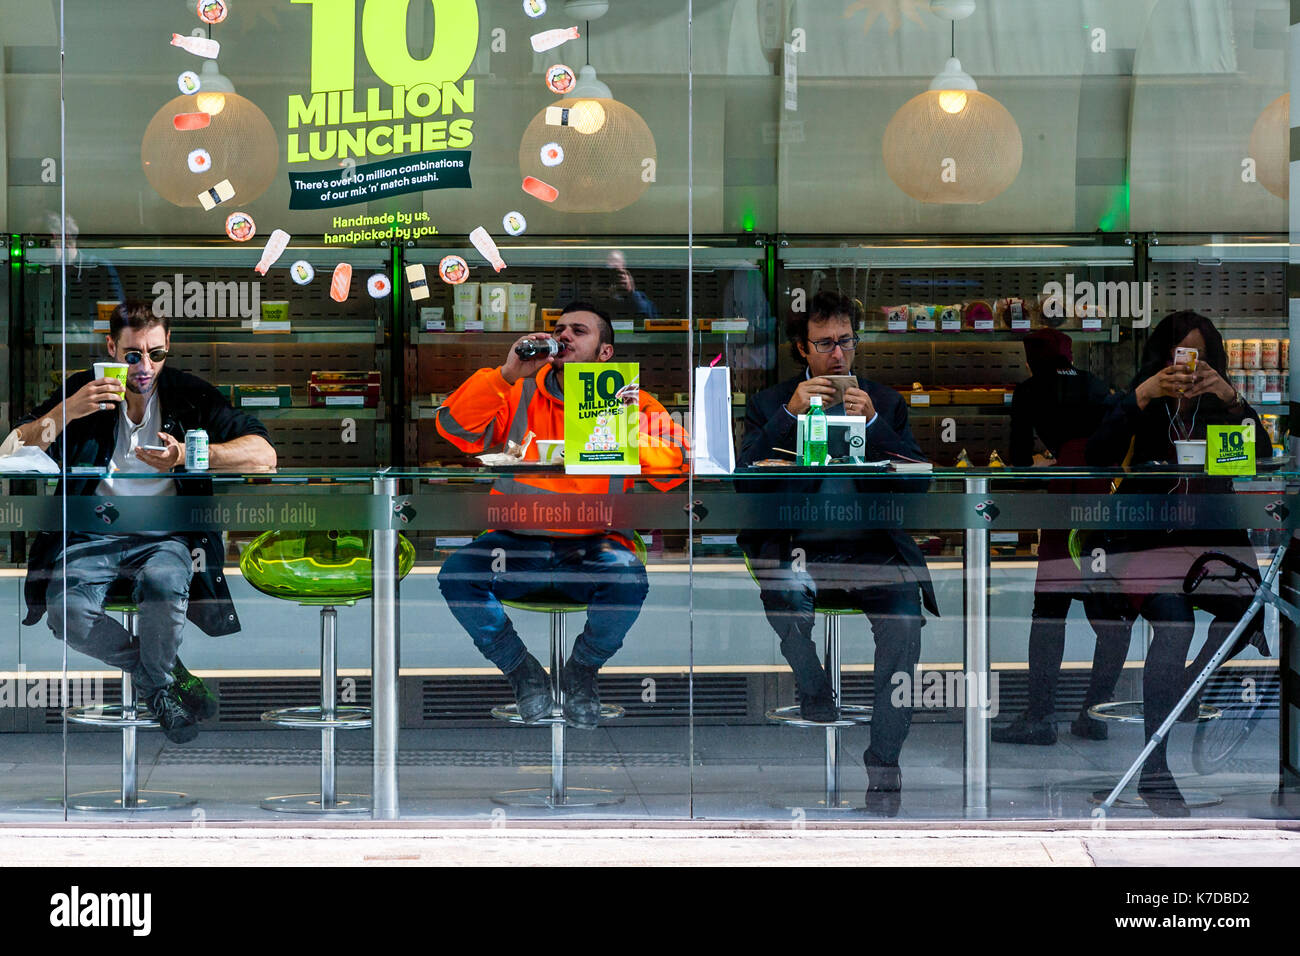 People Eating Lunch In A Cafe In The City Of London, London, UK Stock Photo